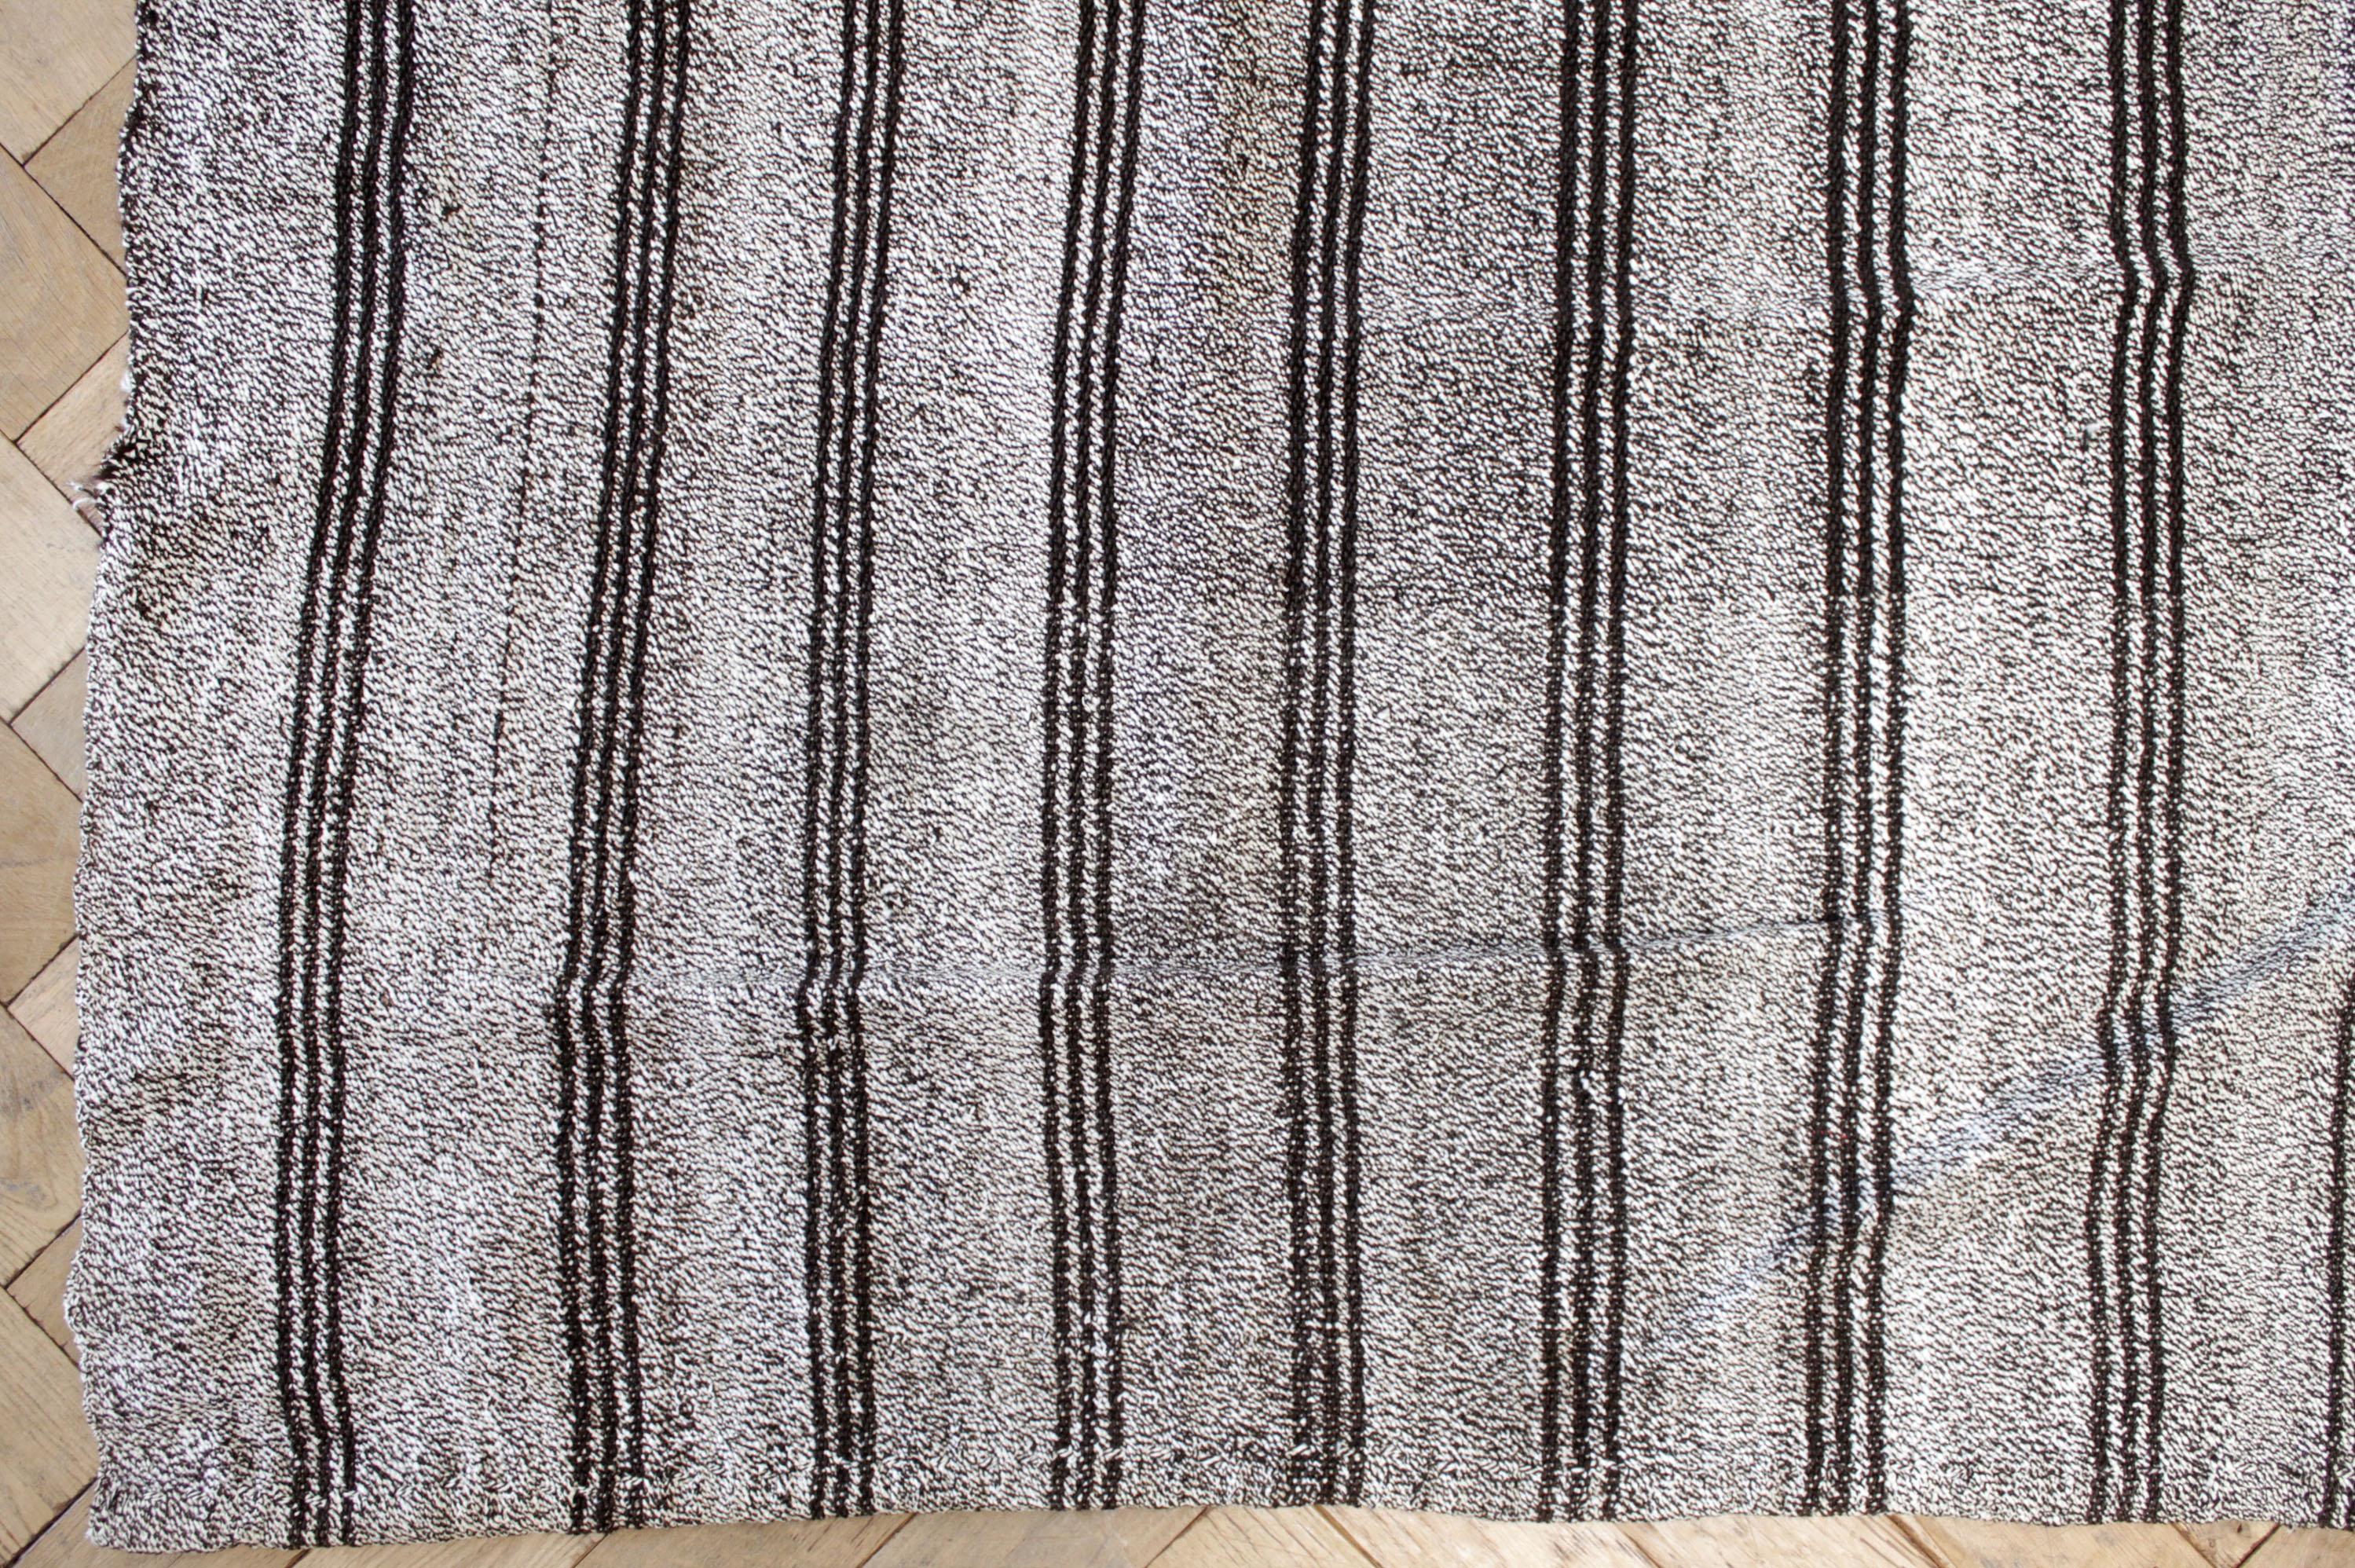 Daria rug
Vintage Turkish rug in brown with white weave and creamy white stripes, with dark brown stripes.

Flat-weave, wool and goat hair, make these extremely durable with great use for high traffic areas. This item has been cleaned, and is